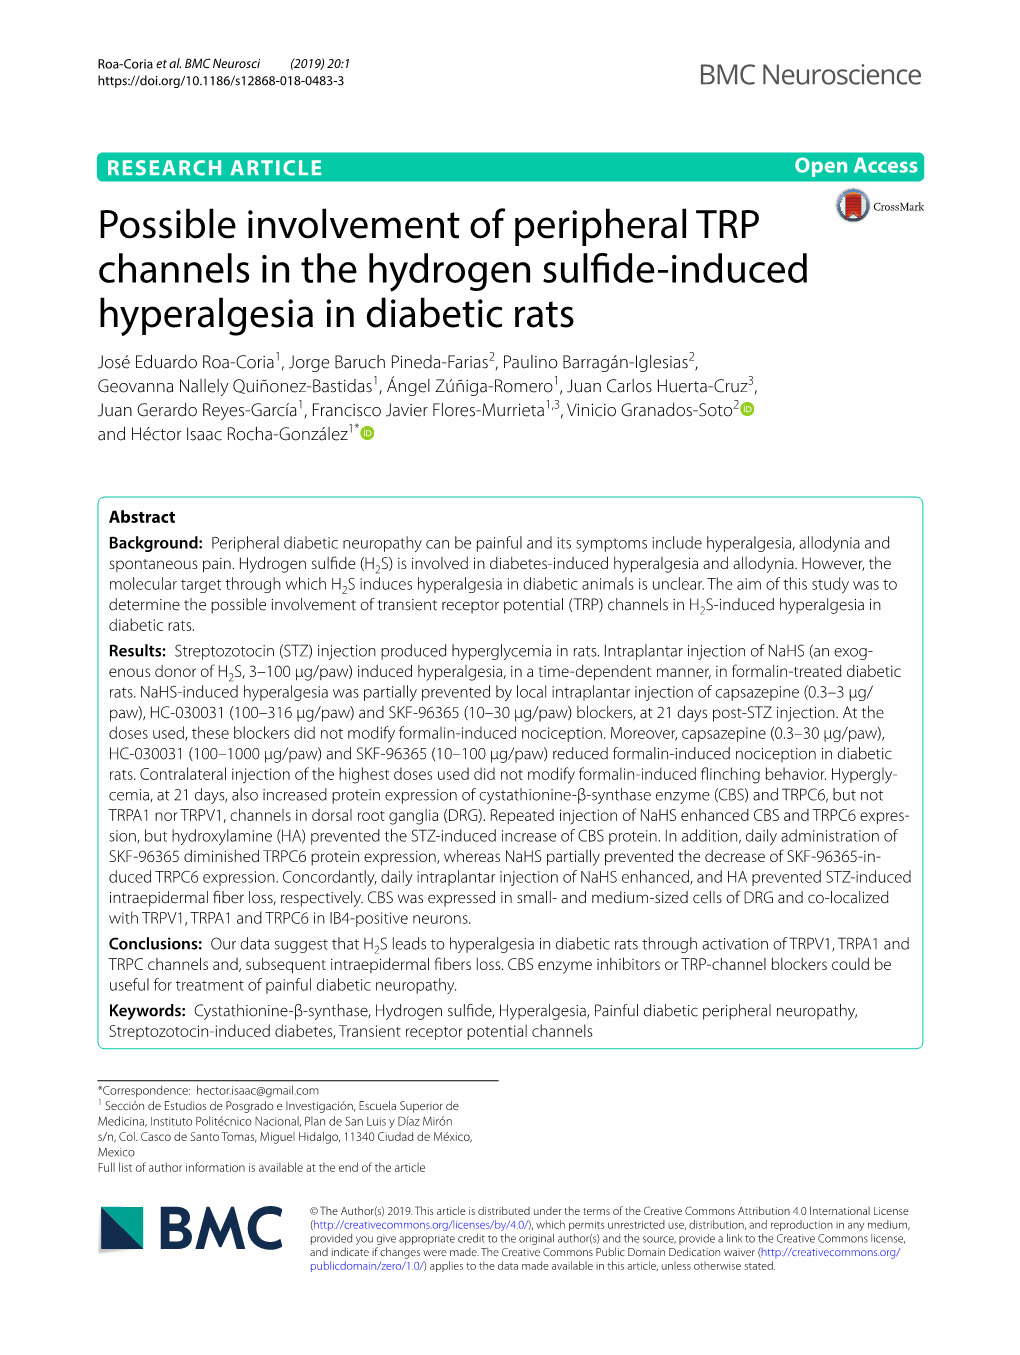 Possible Involvement of Peripheral TRP Channels in the Hydrogen